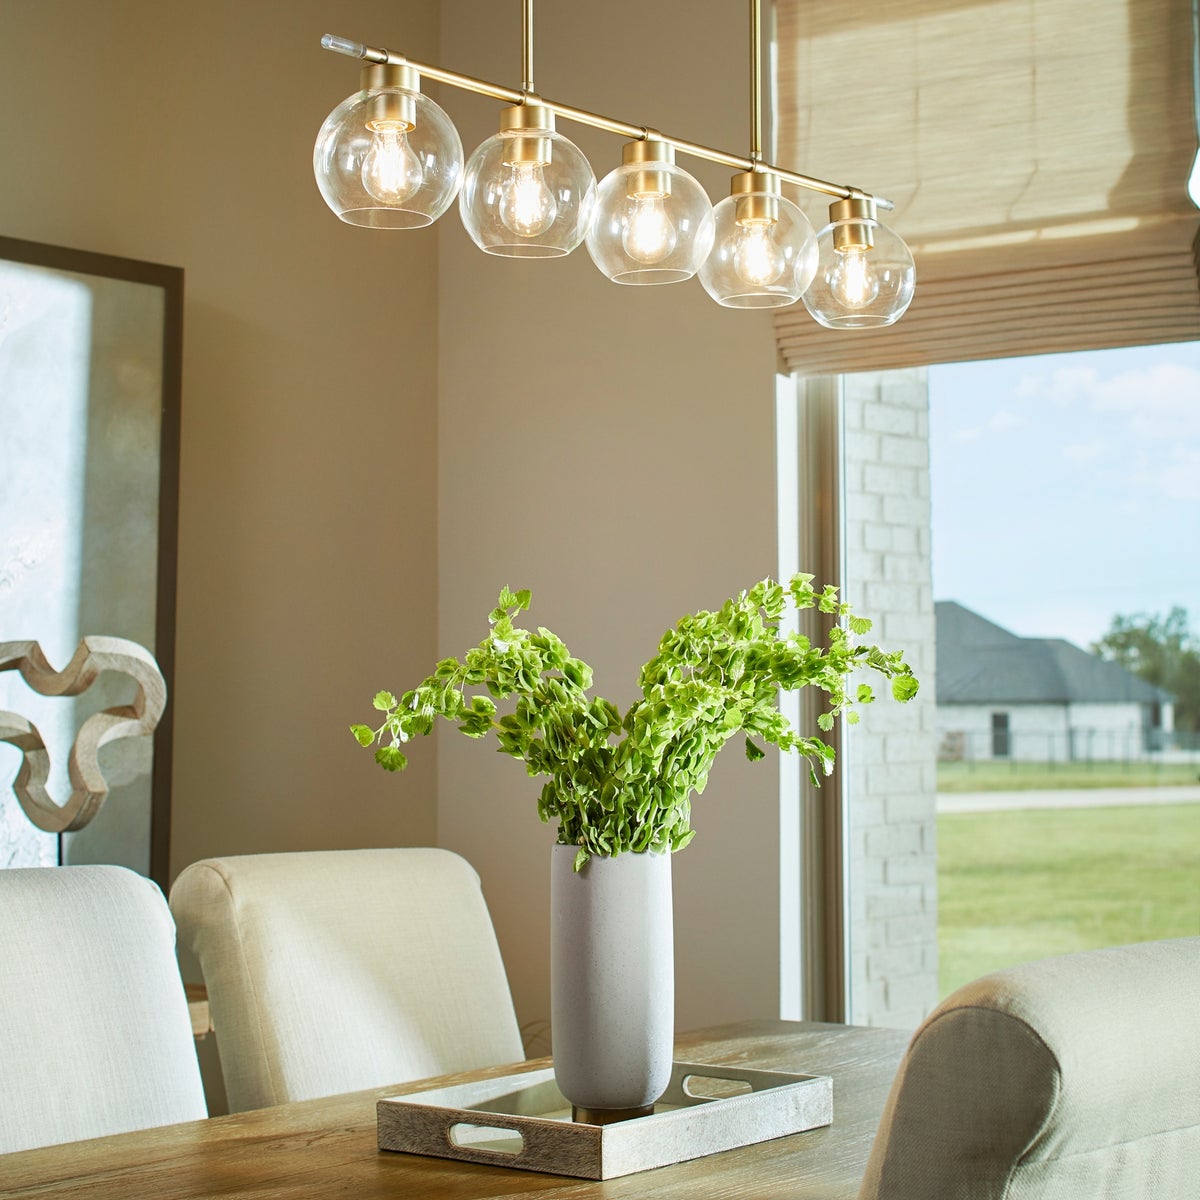 Transitional linear chandelier with rounded glass shades and aged brass finish. Thin acrylic accents add a mid-century touch. Perfect addition to any space.